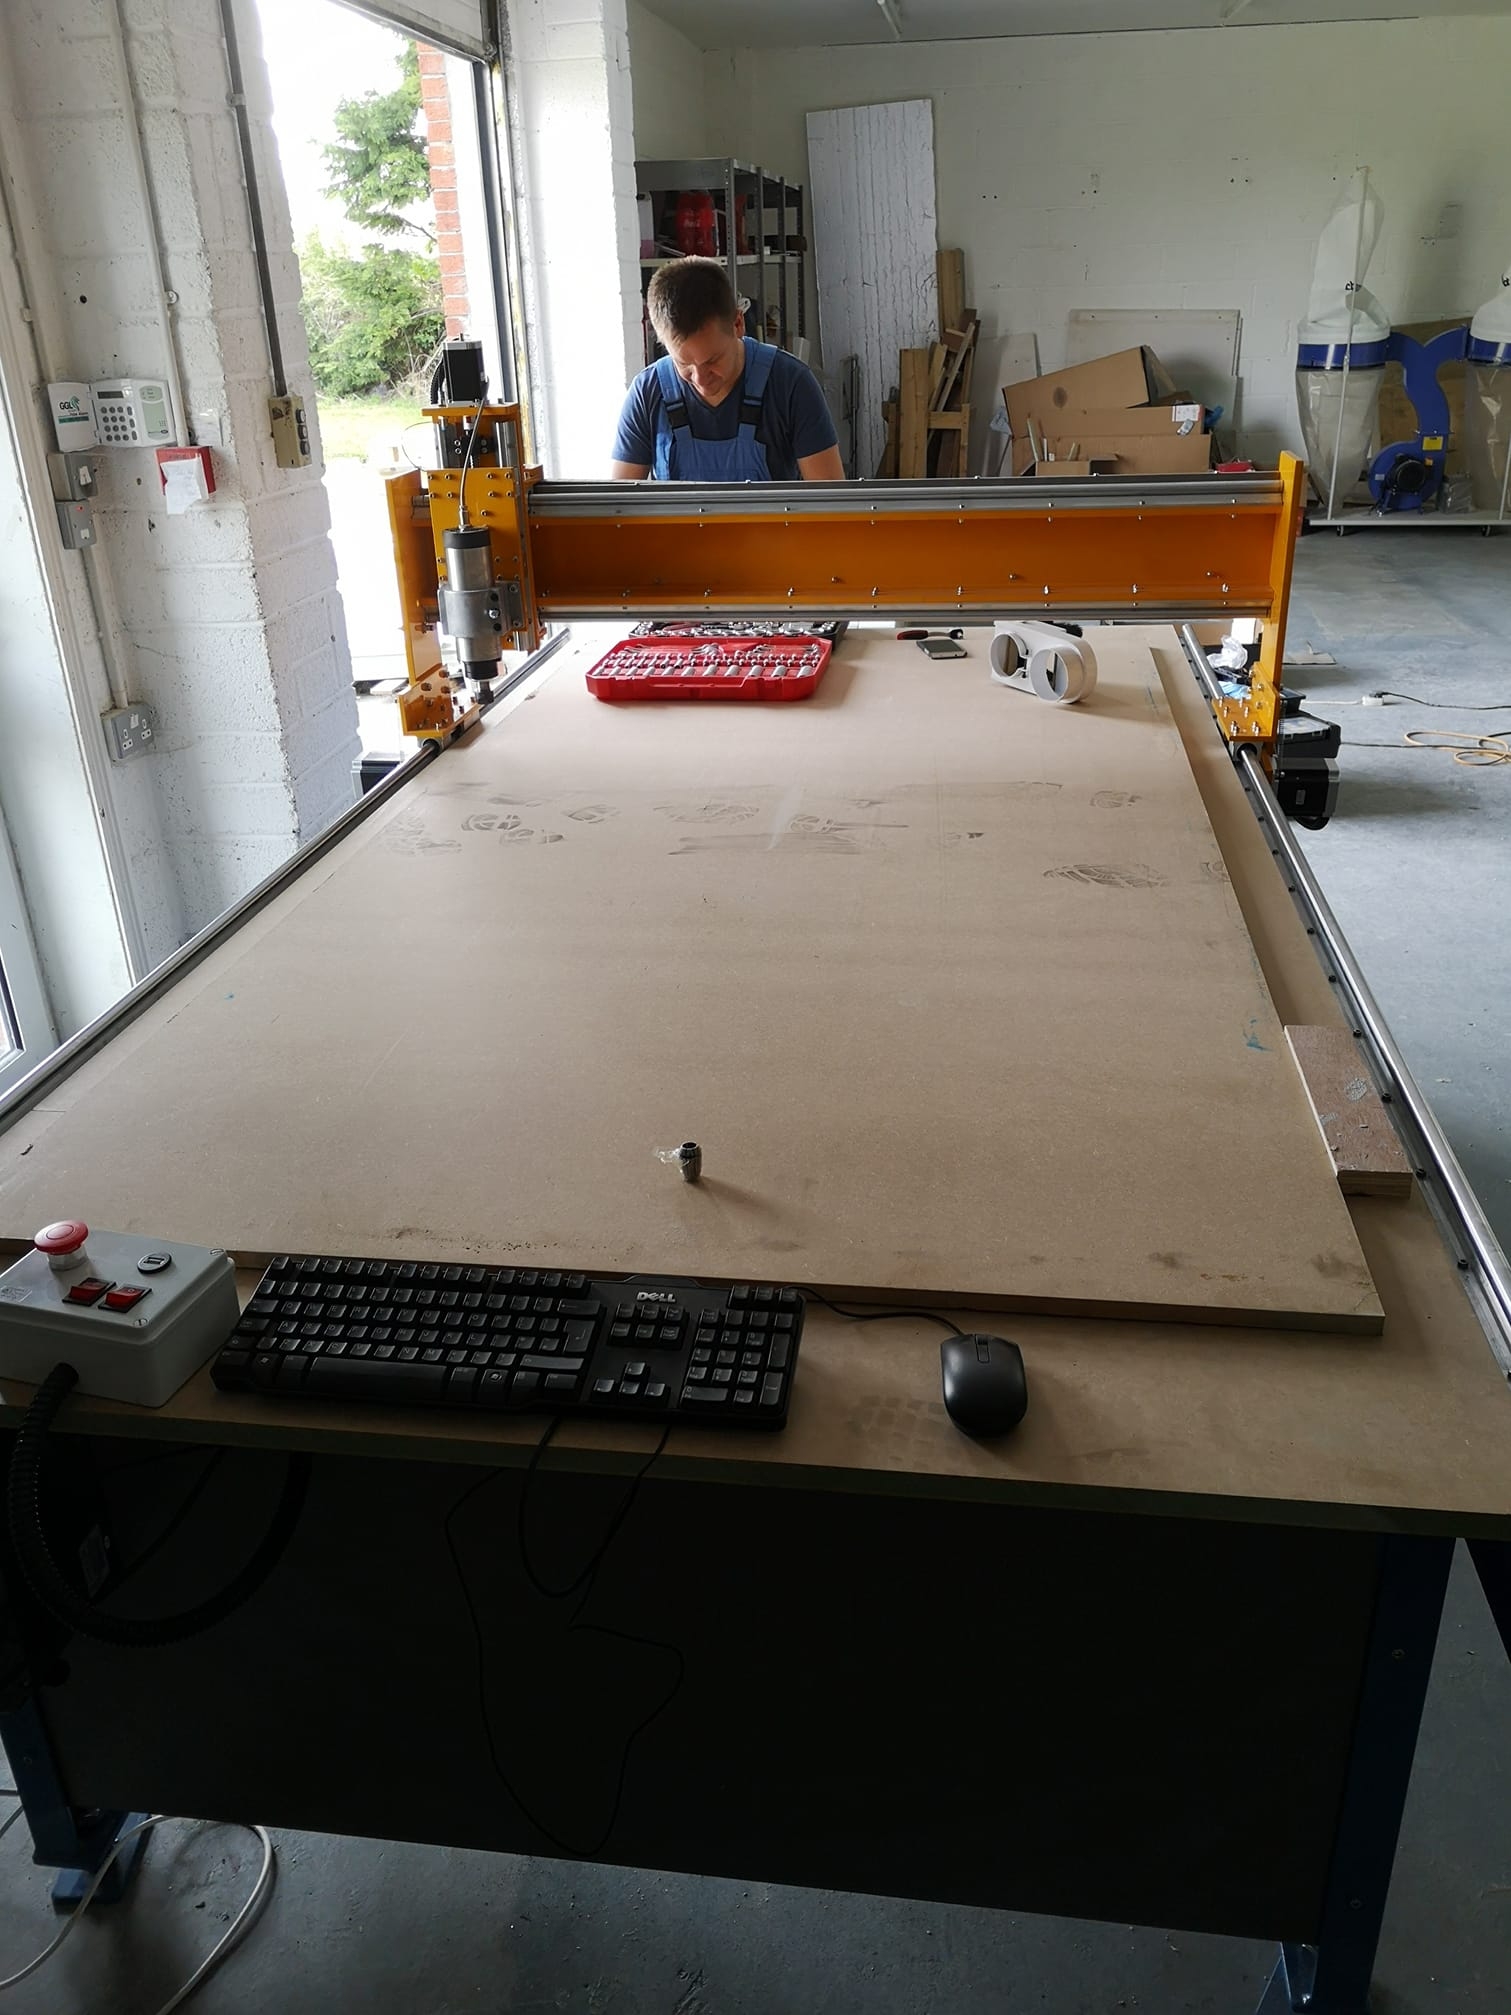 Our new CNC router was delivered and installed this week . Can't wait to get into this can cut a complete triple Swift box in 9 minutes